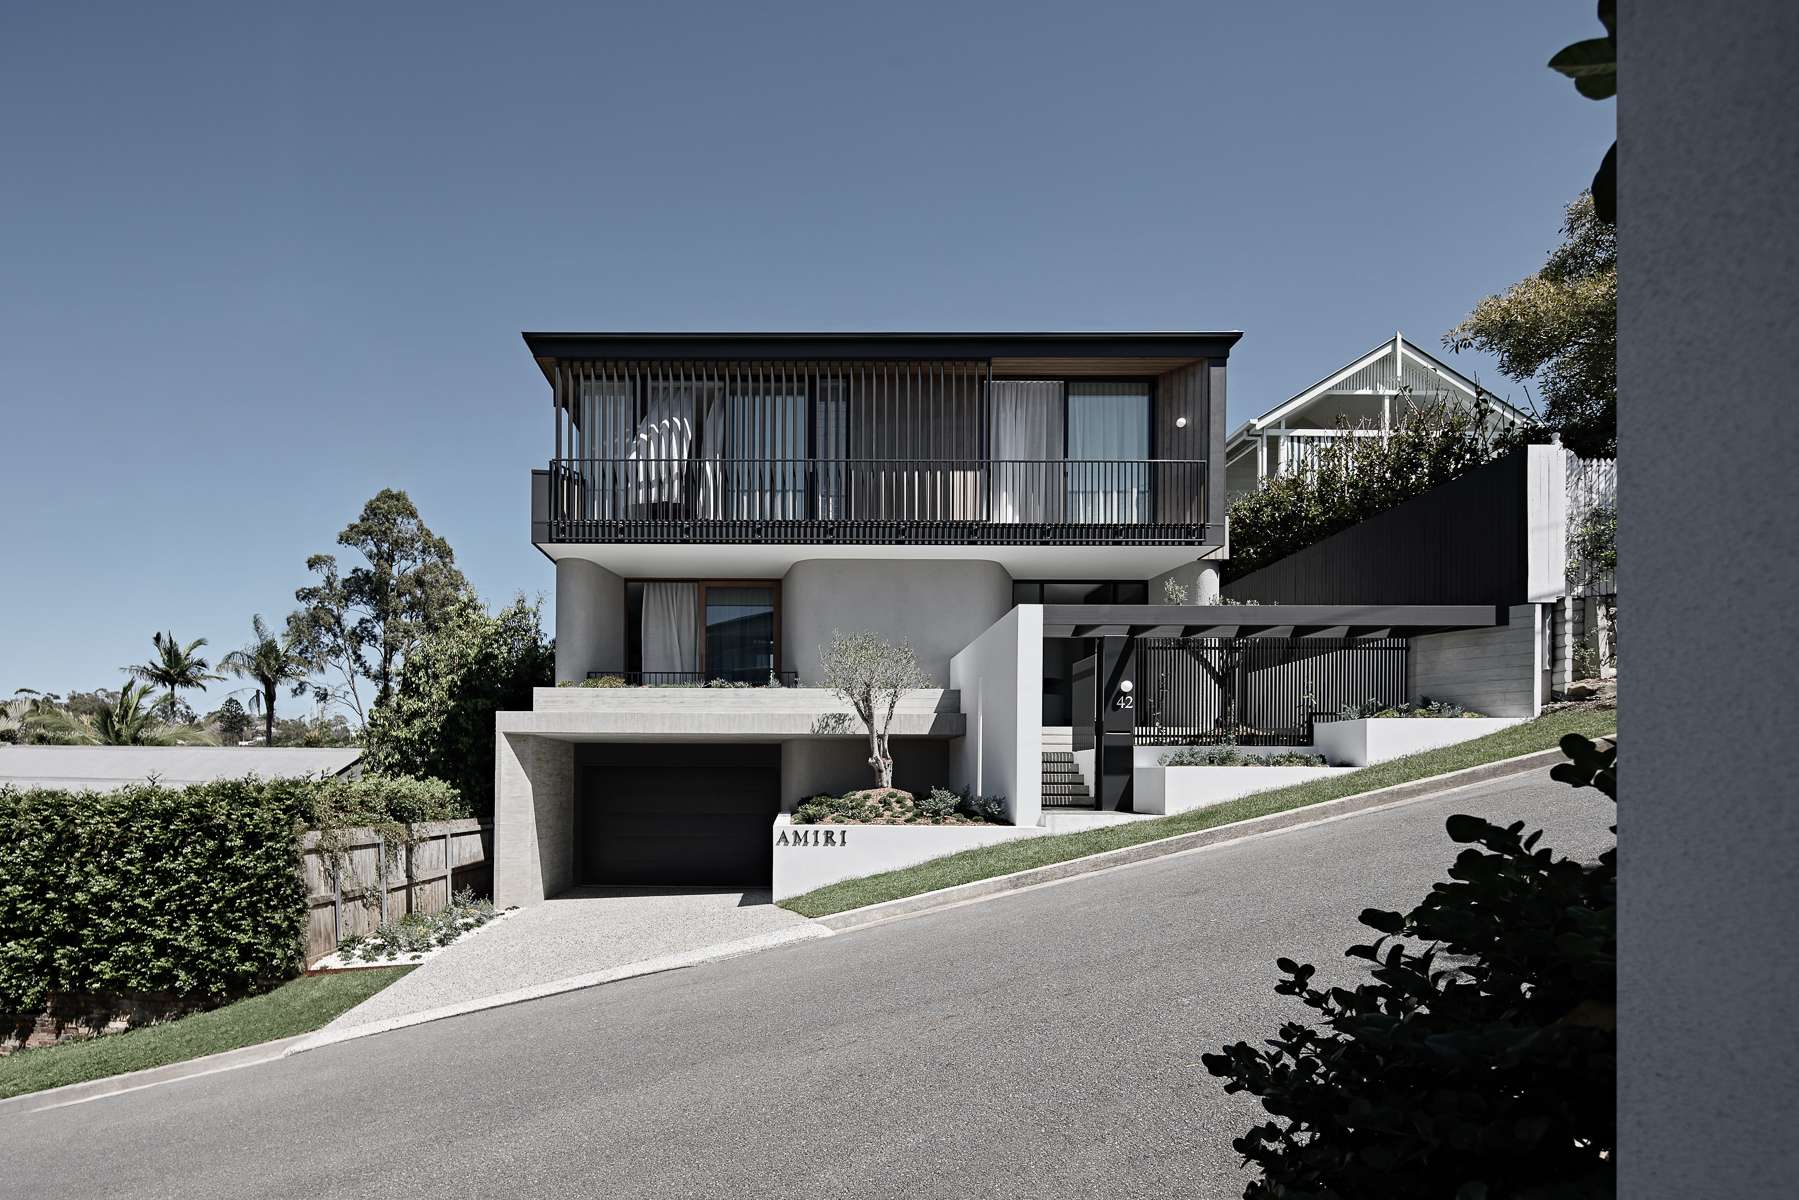 Amiri Courtyard House by Kelder Architects showing street view of sloping site